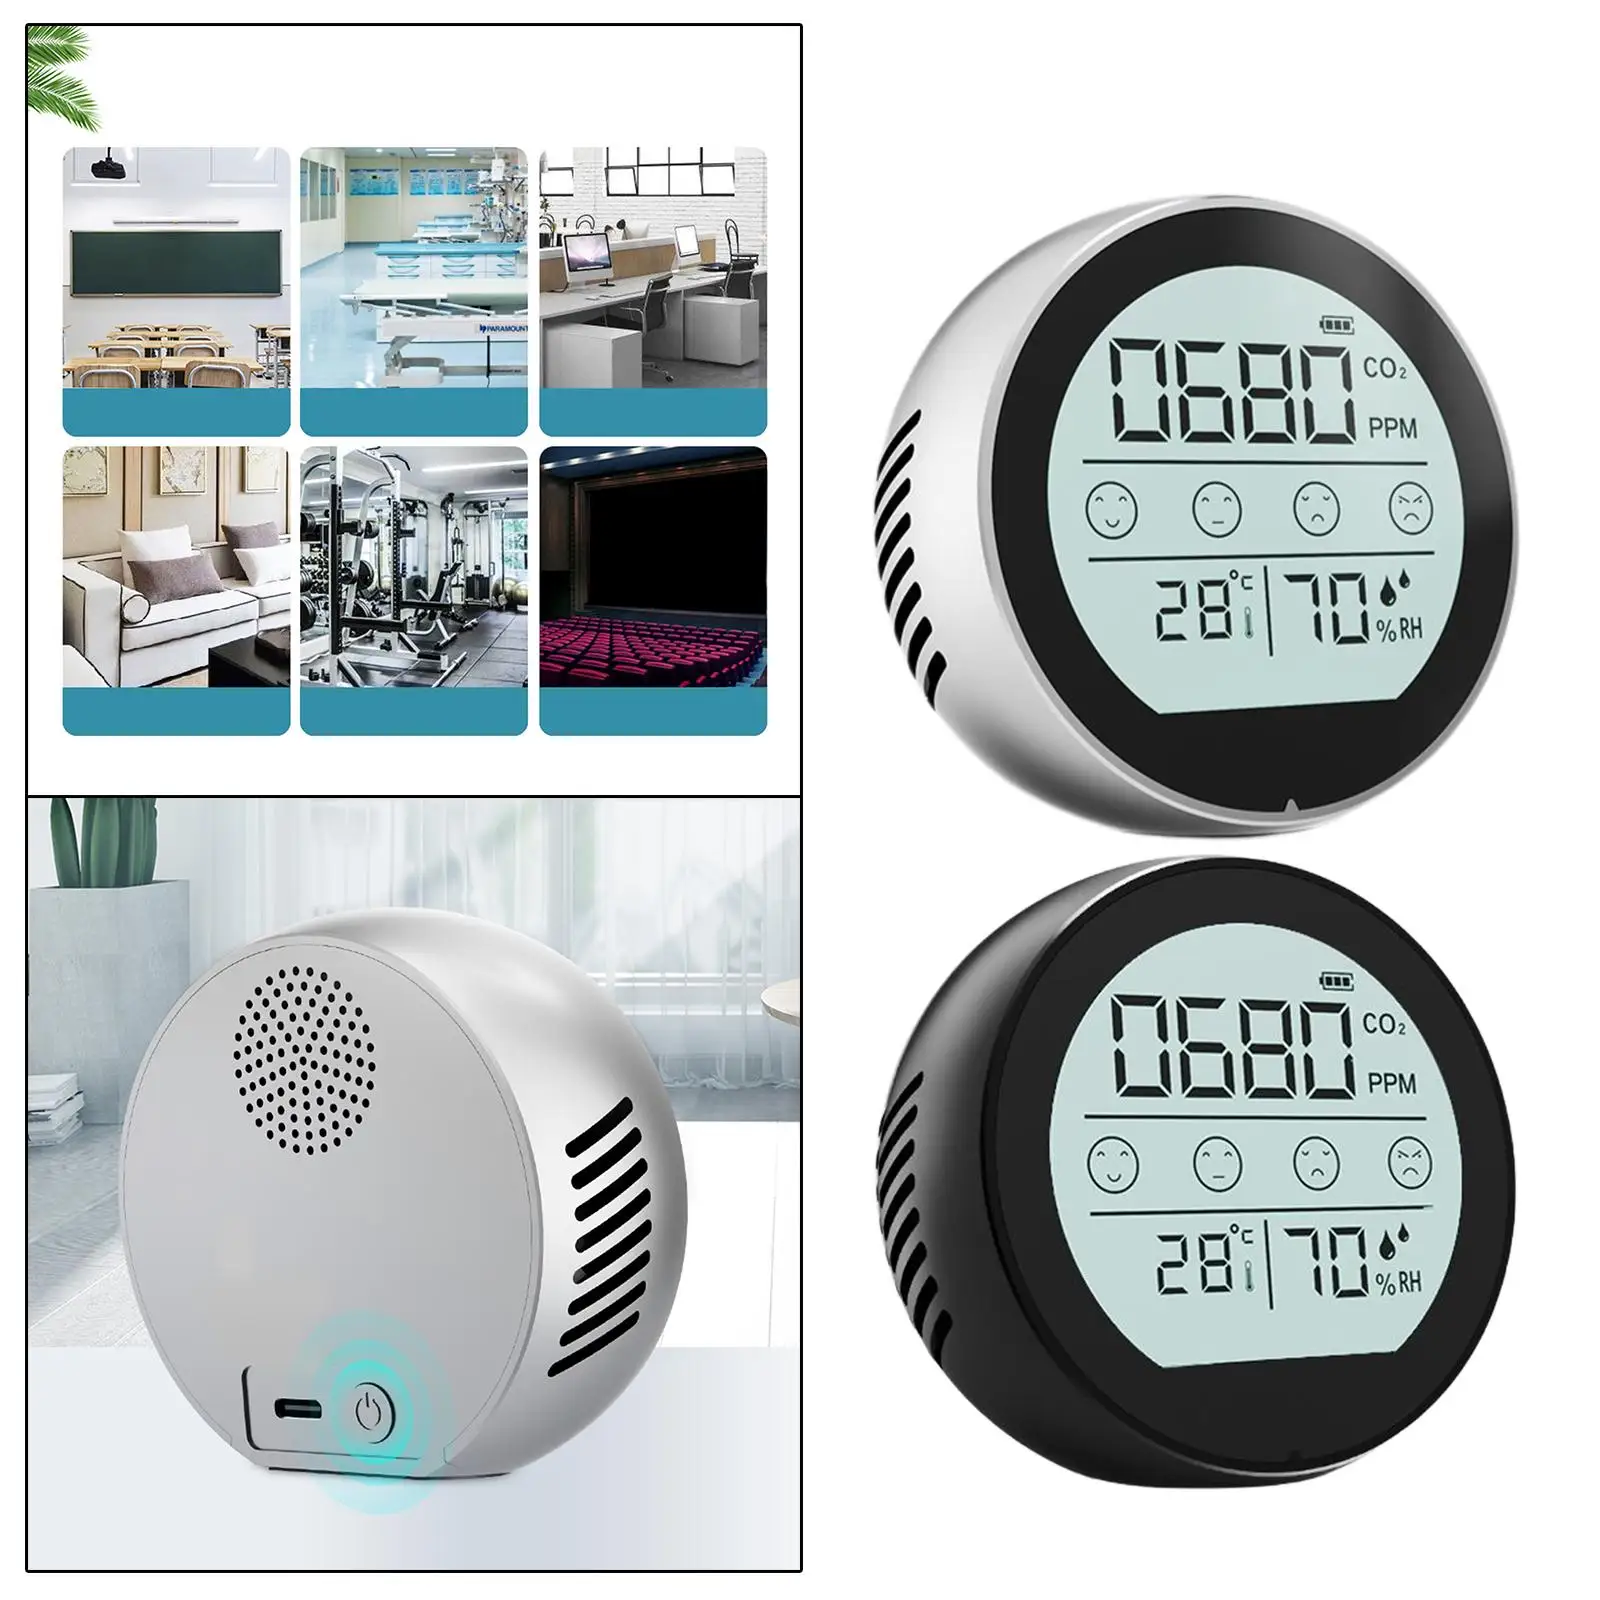 CO2 Meter Temperature Humidity Monitor Indoor CO2 Alarm Fast Measurement Meter Carbon Dioxide Monitor NDIR Sensor for Warehouse